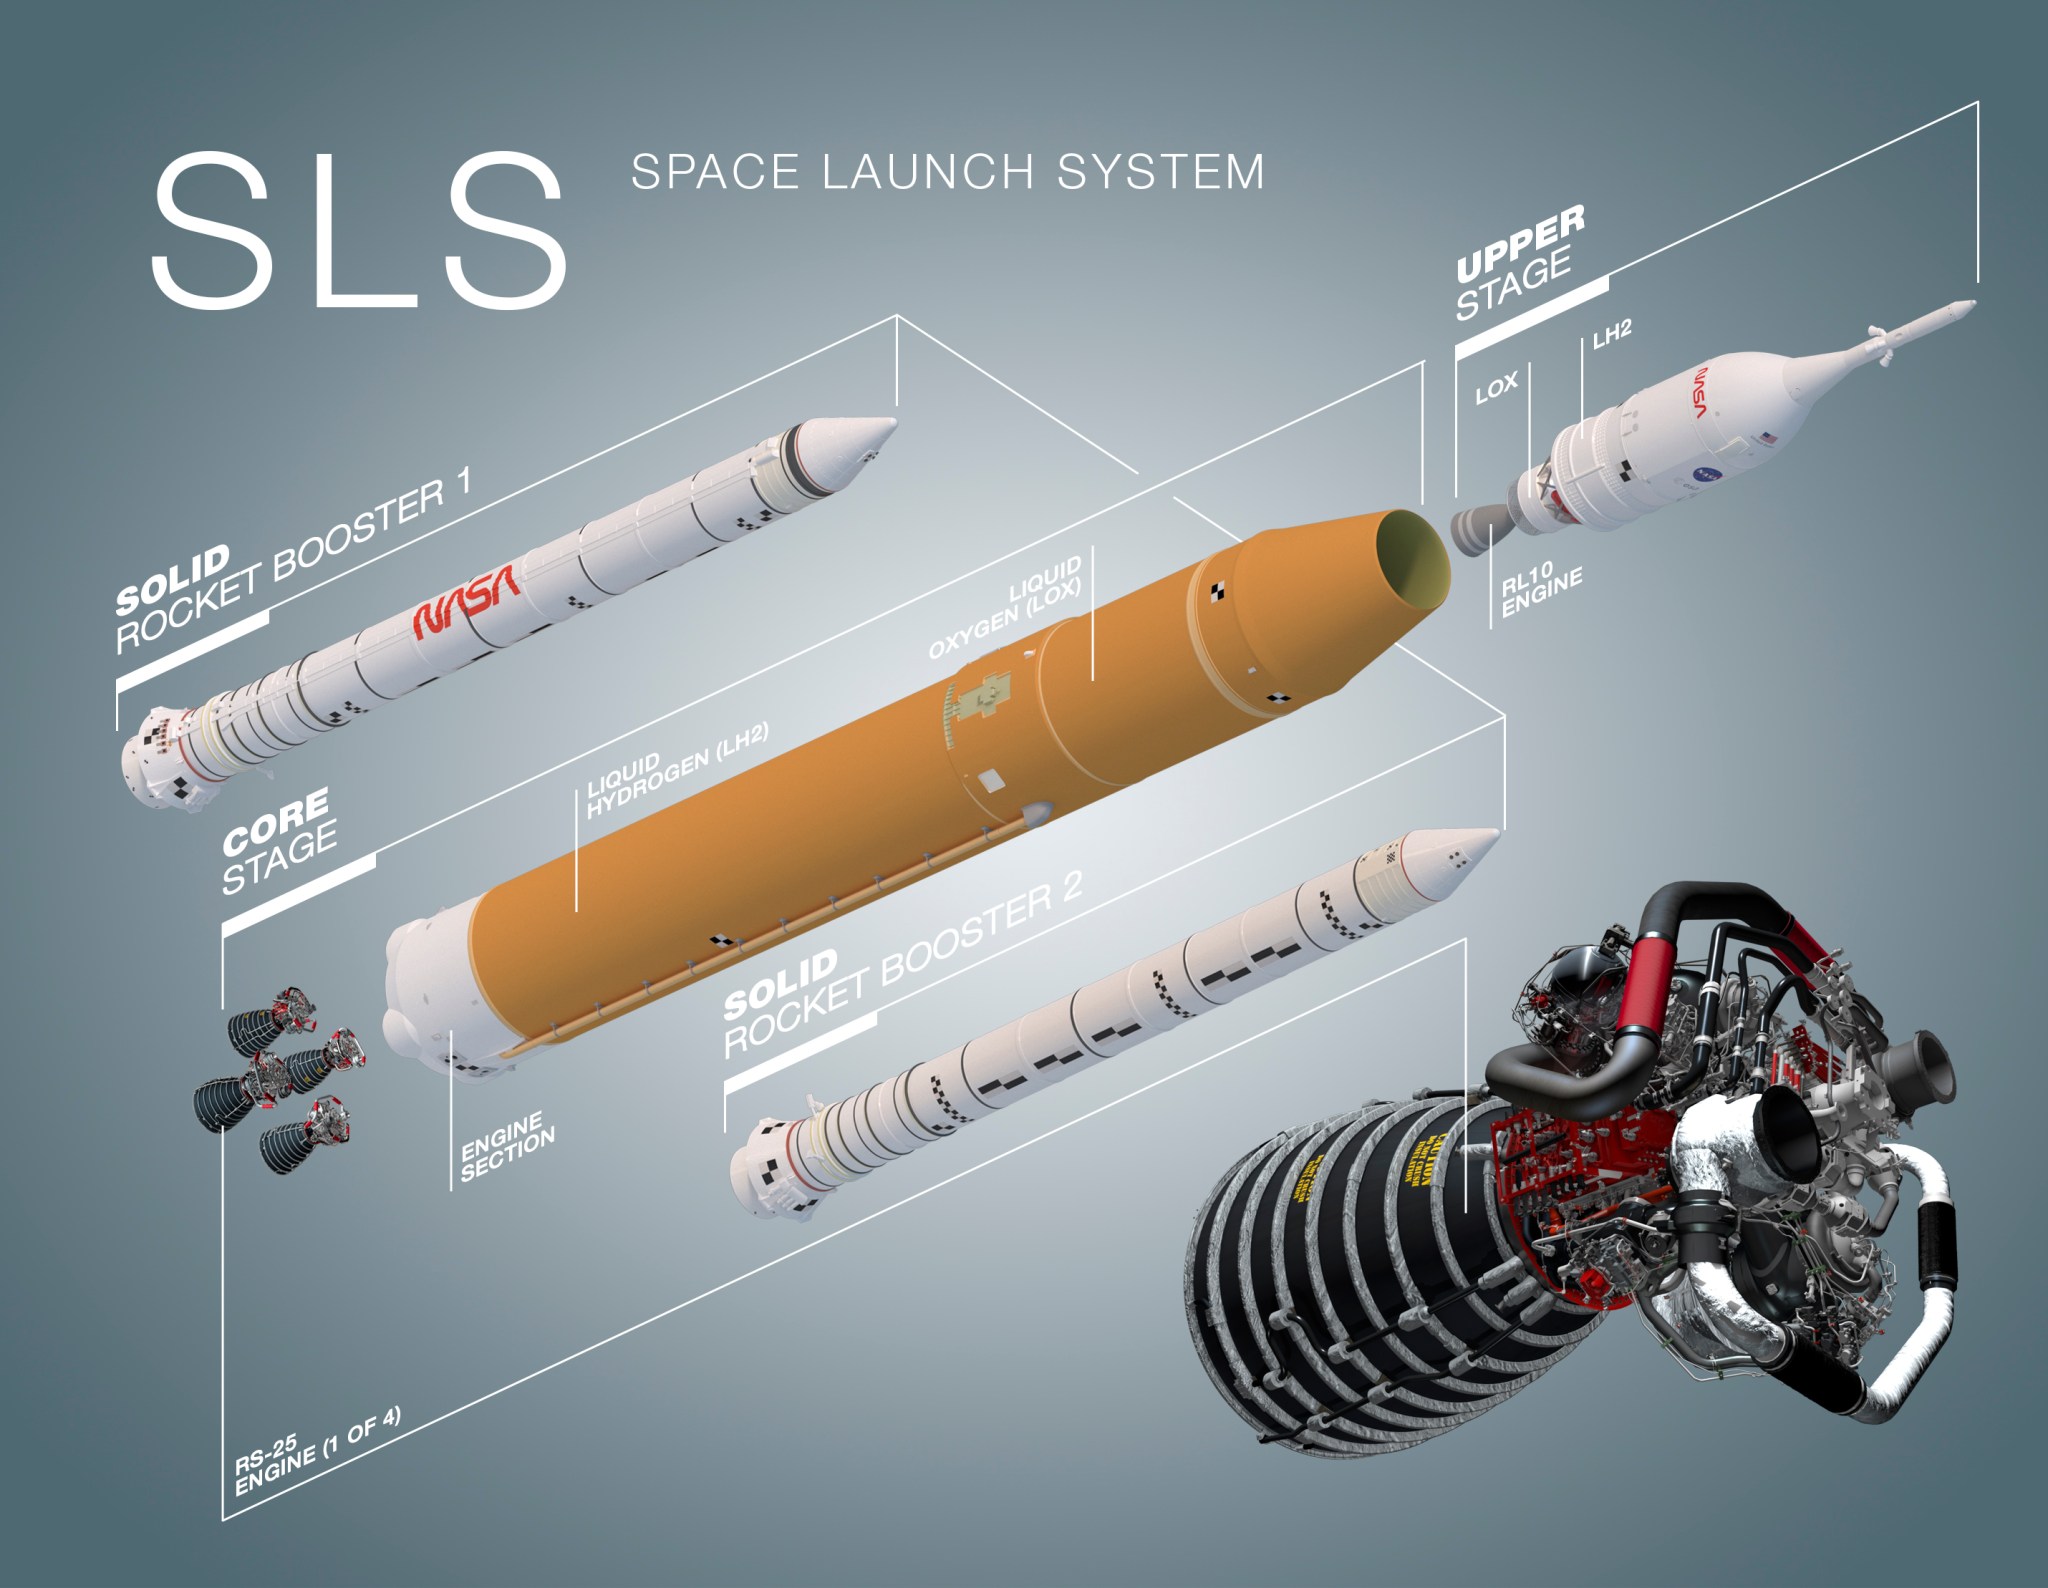 Propulsion System for the Space Launch System